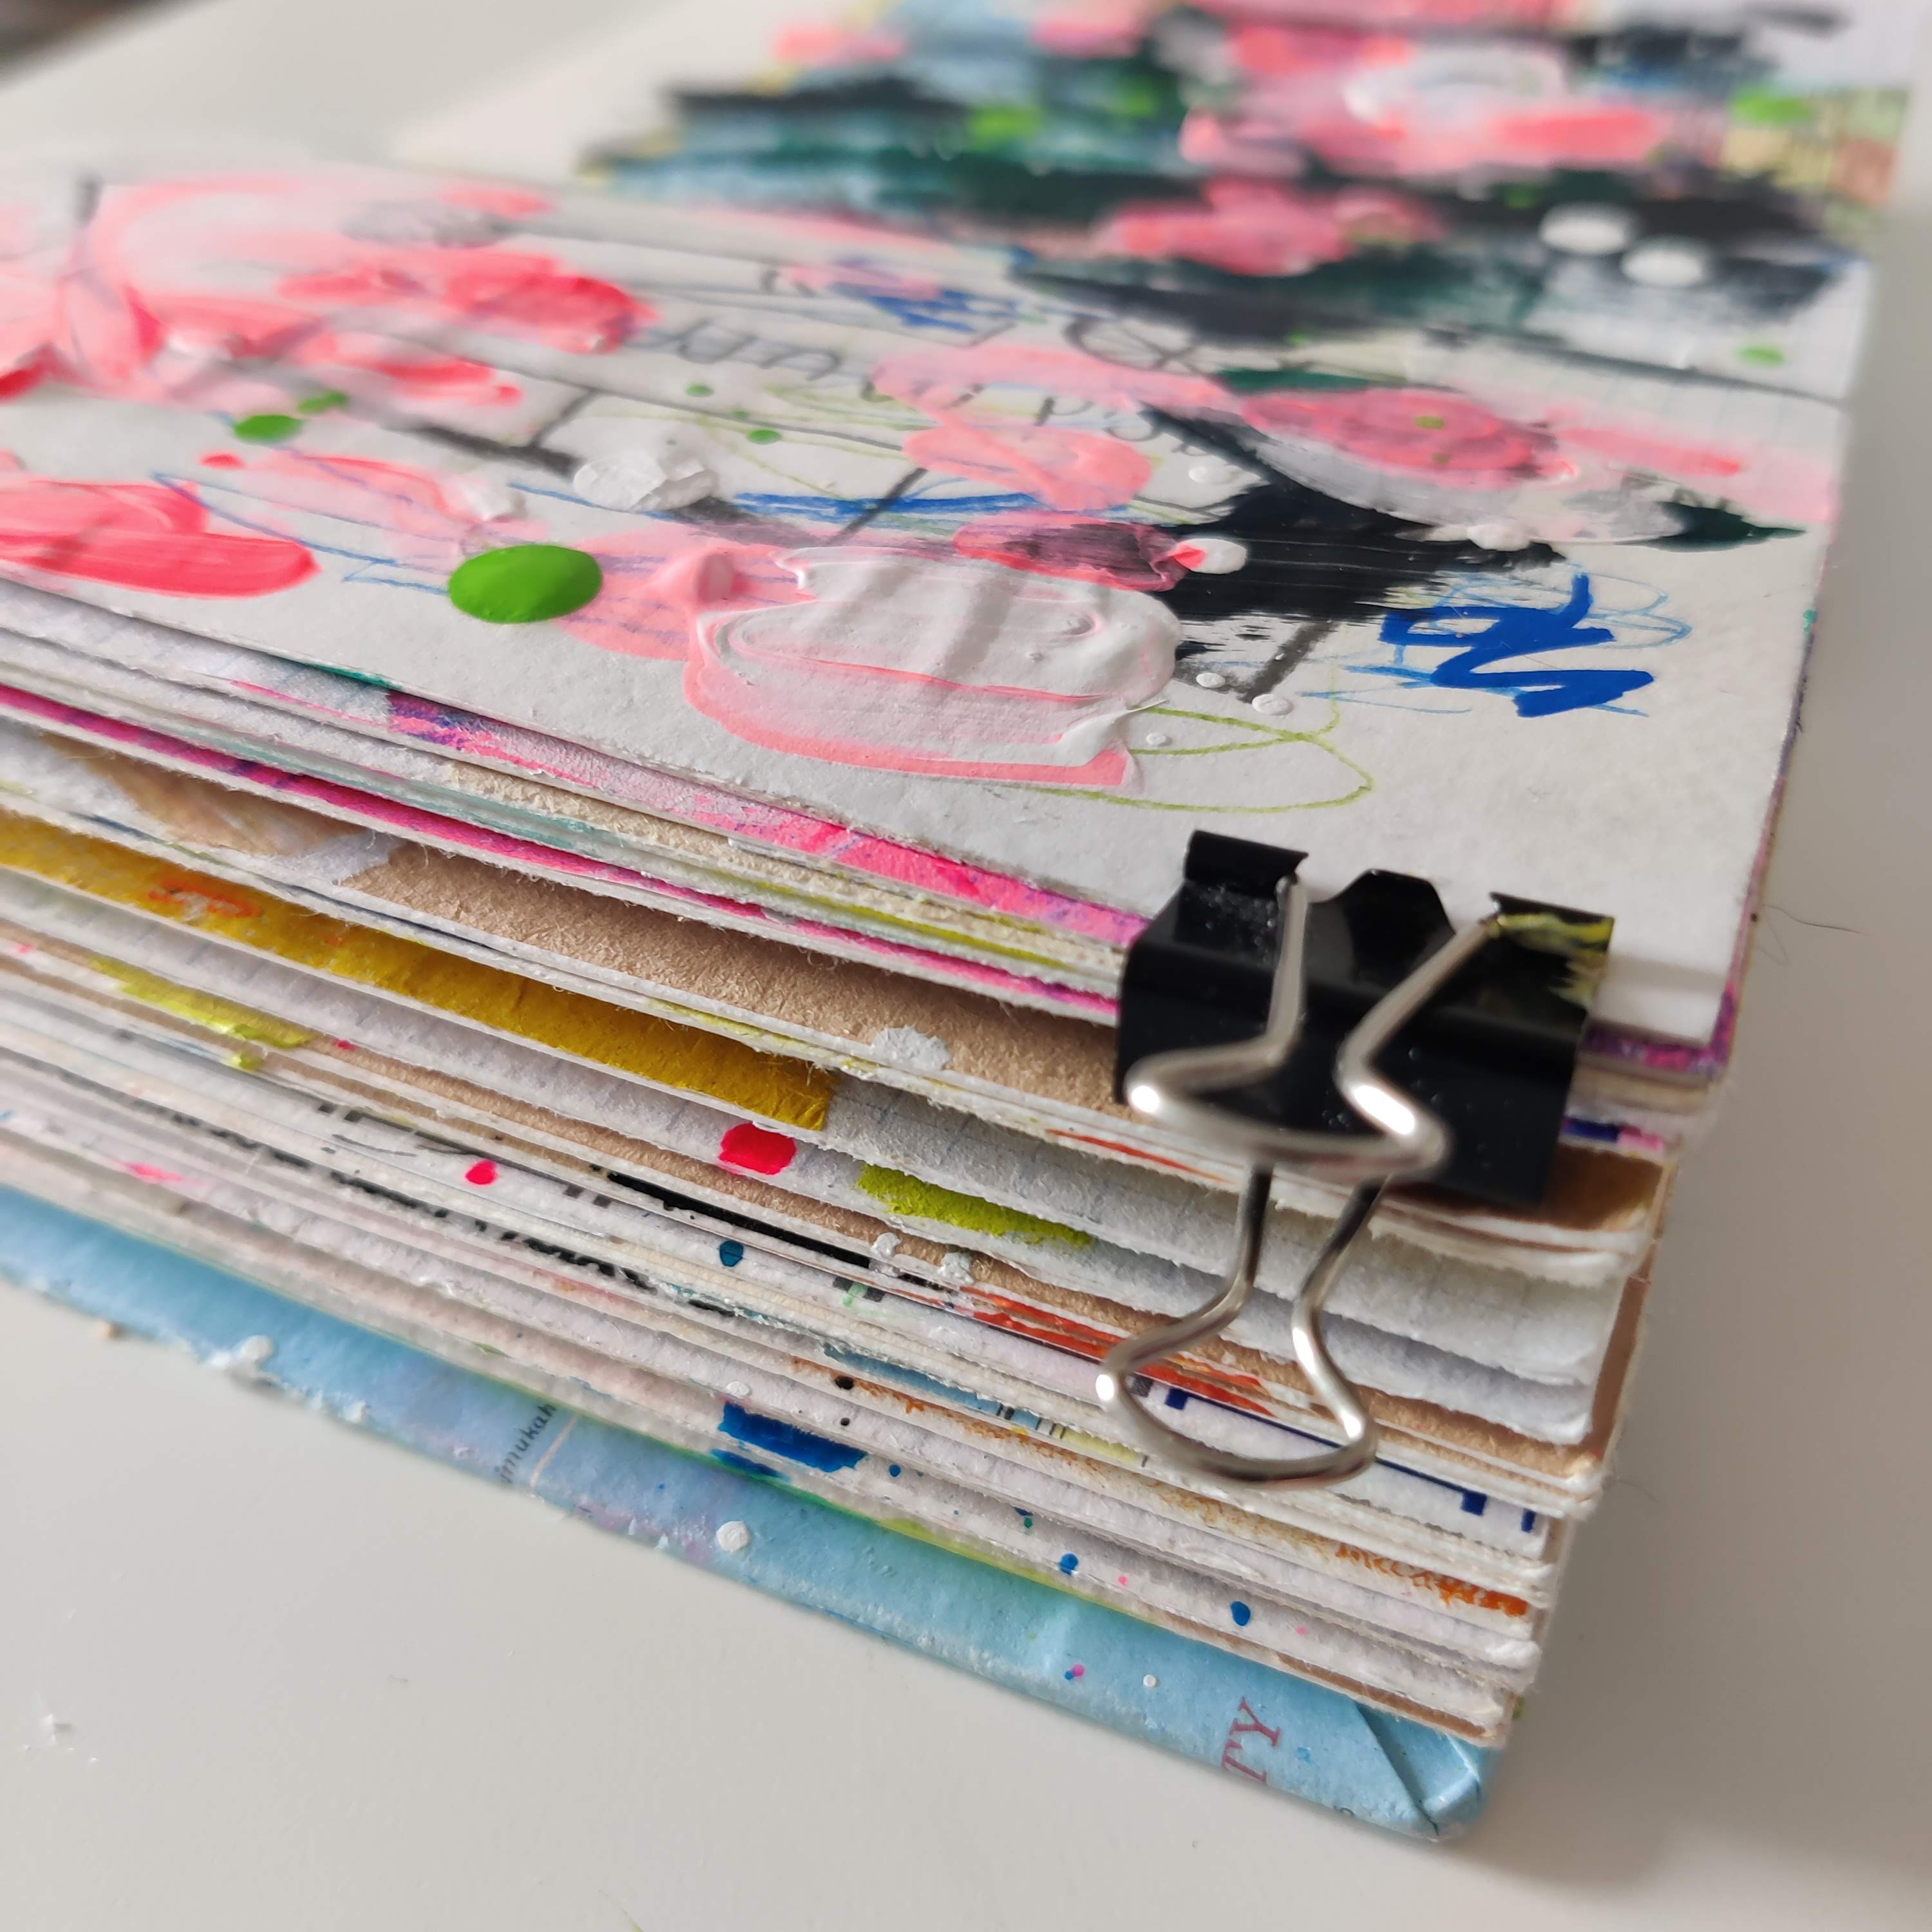 The corner of an open mixed media art journal. The page includes bright pink paint and elements of white, blue, and lime green.